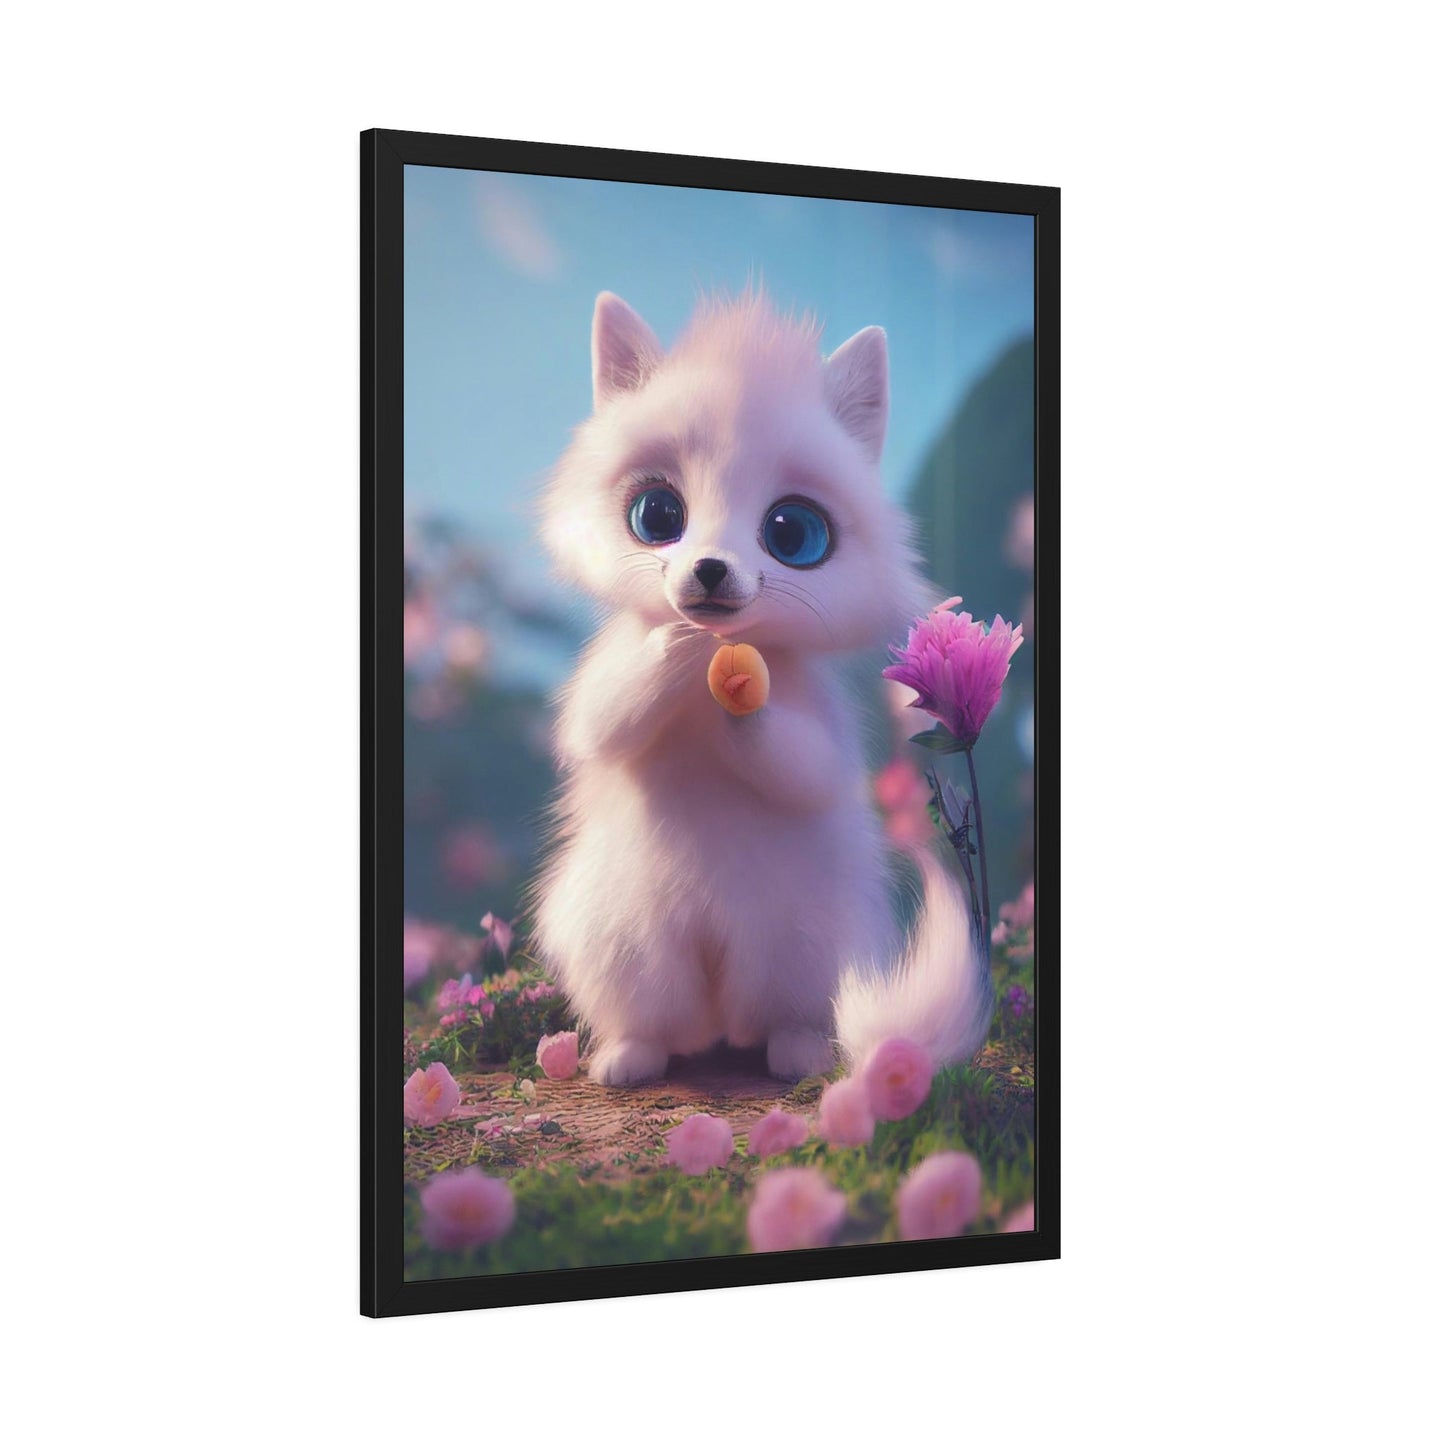 Whimsical World of Cartoons: Print on Canvas and Wall Art for Kids